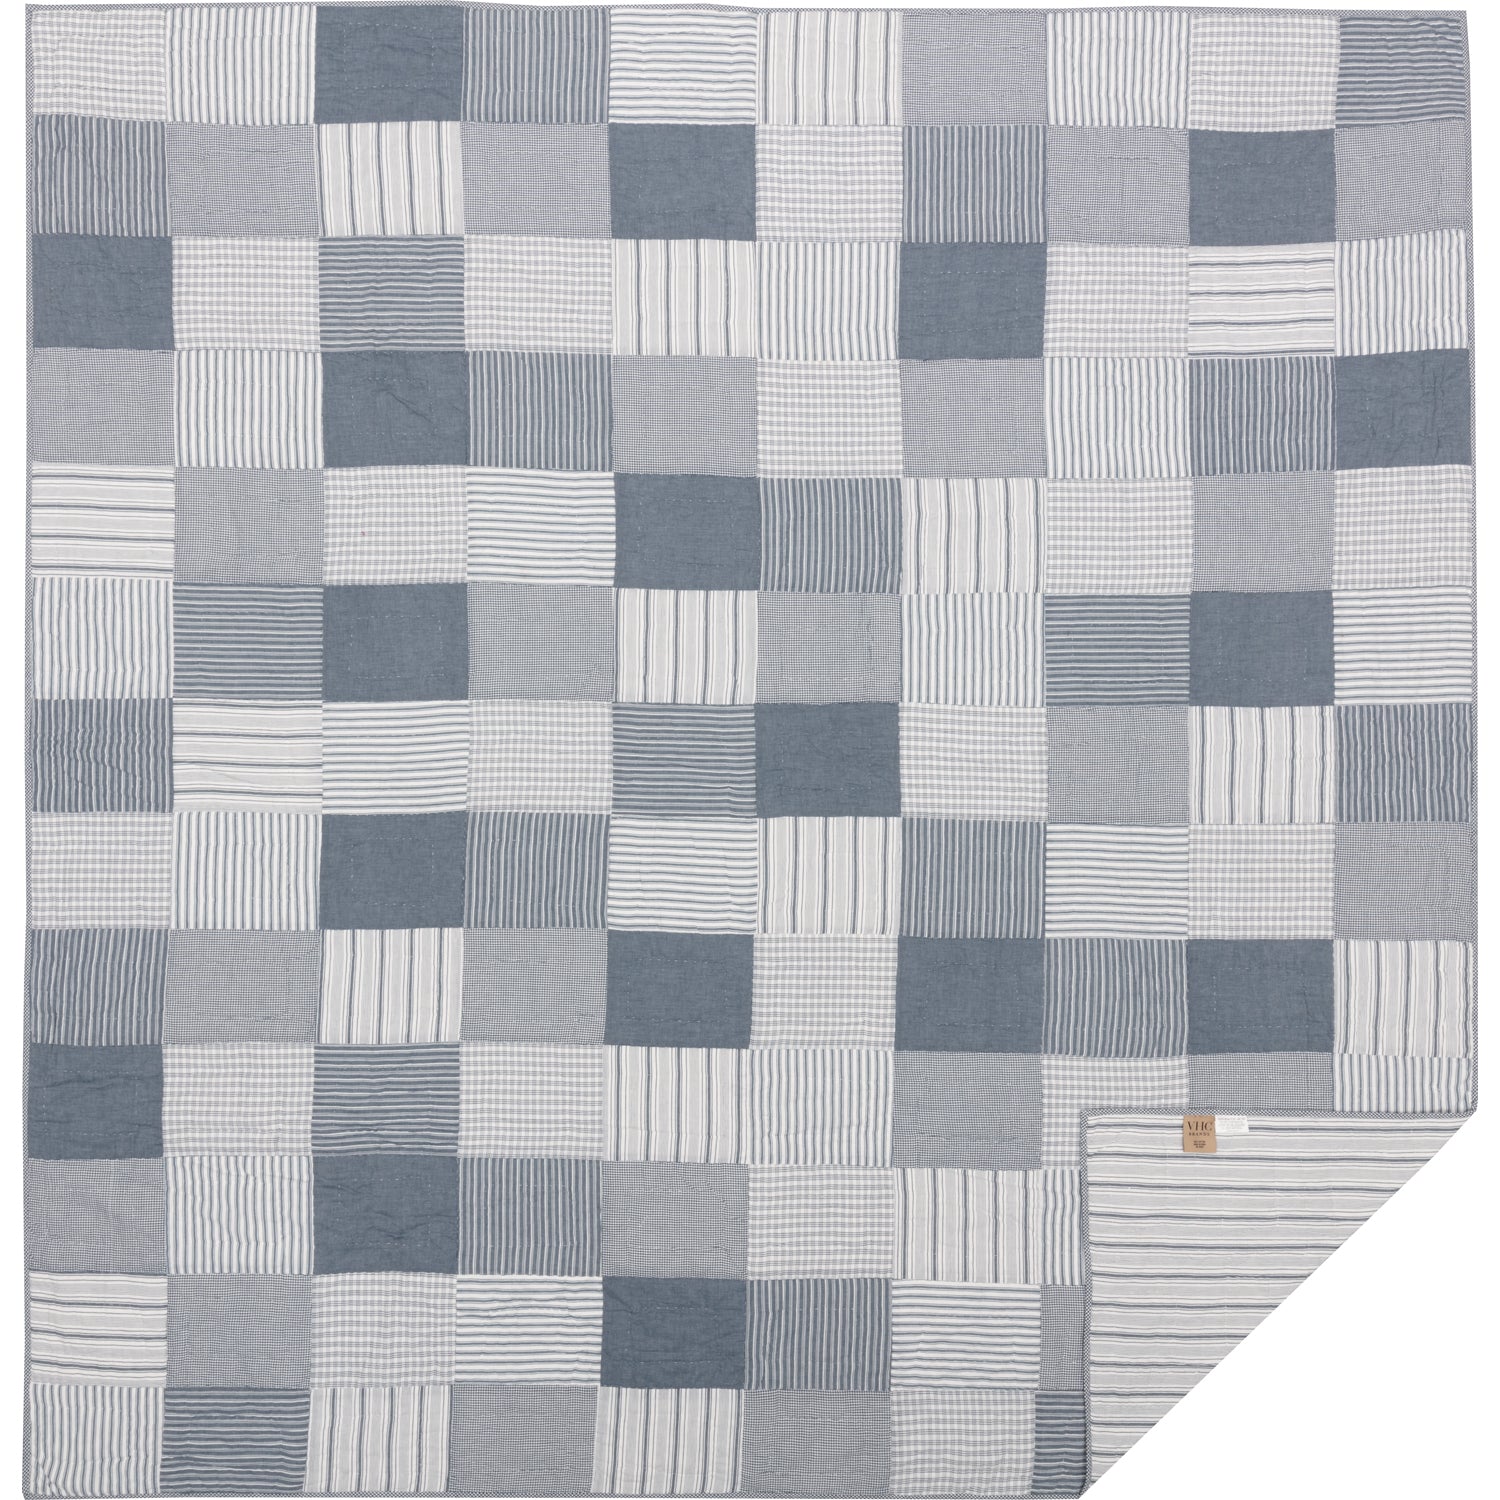 April & Olive Sawyer Mill Blue Queen Quilt 90Wx90L By VHC Brands